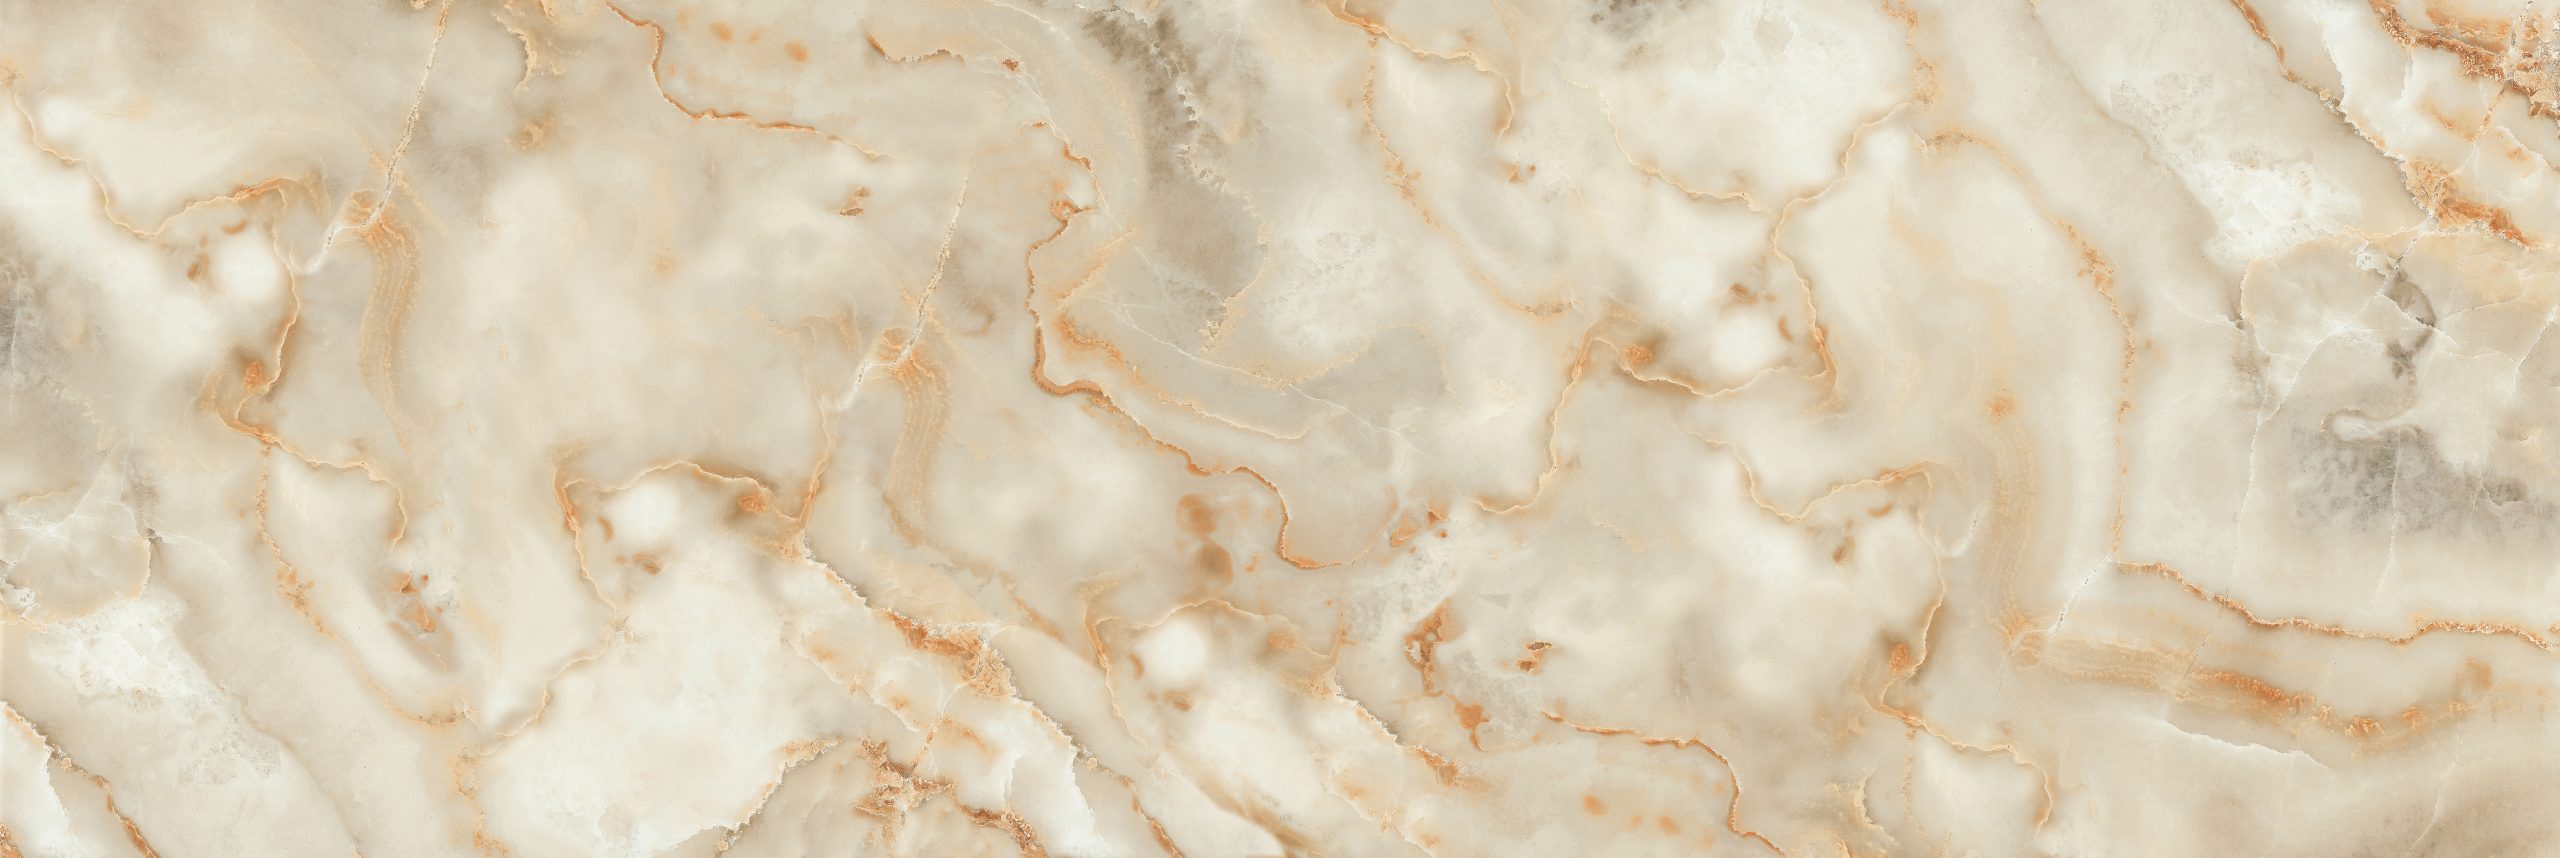 ceramic-marble-texture-surface